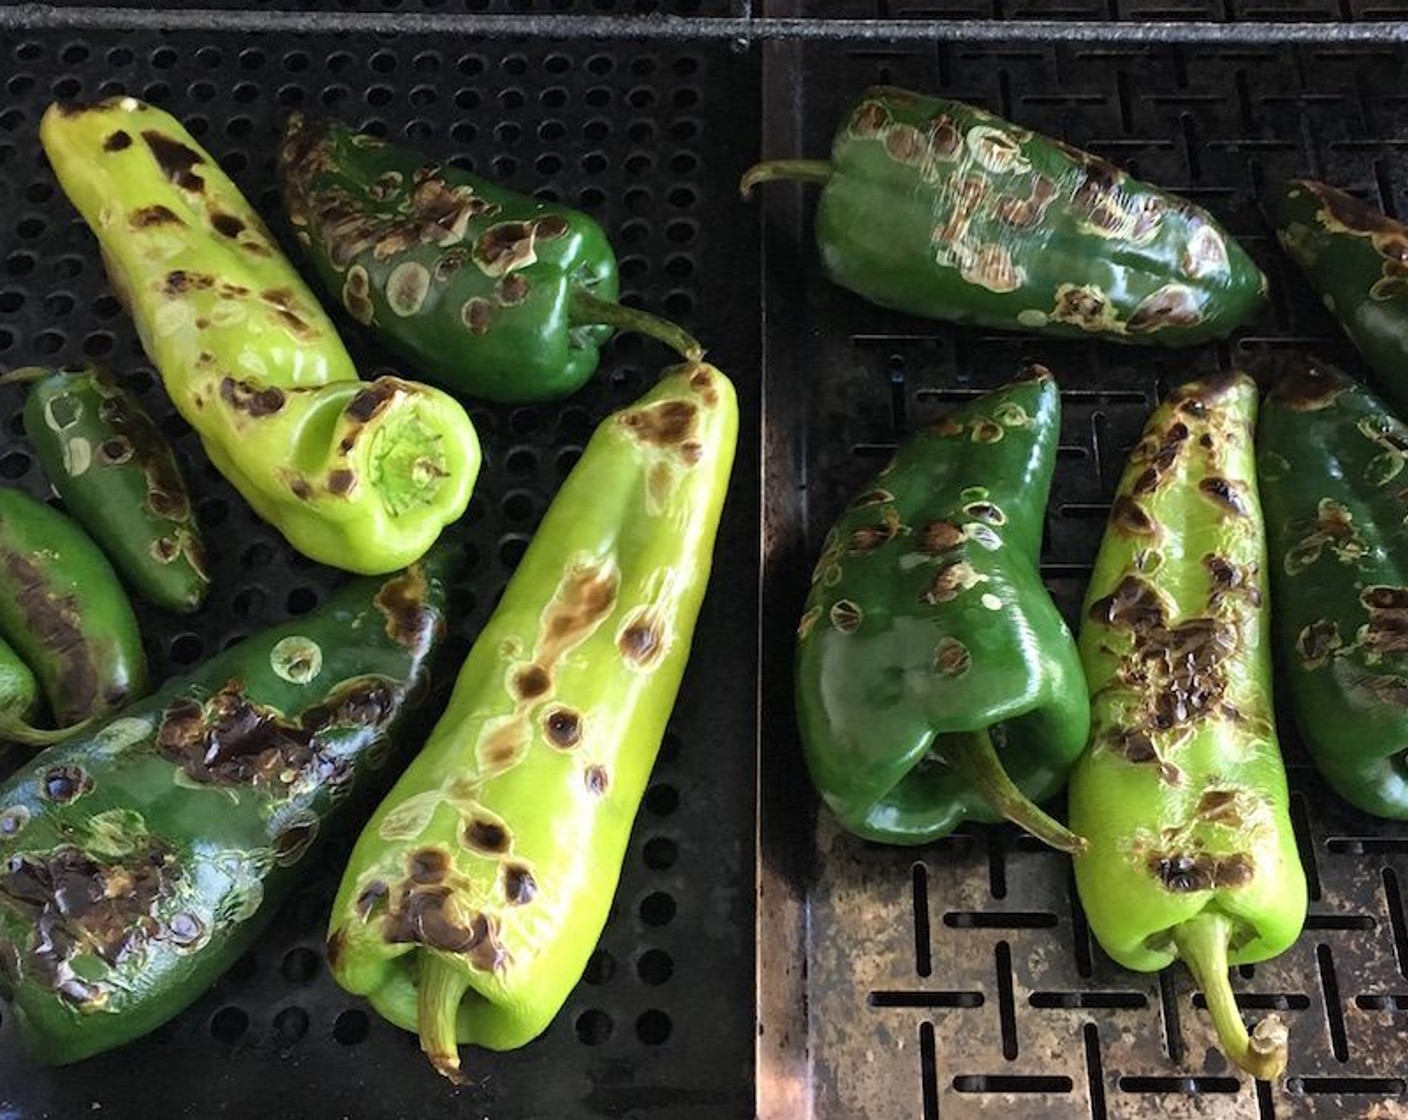 step 1 Grill the Poblano Peppers (4), Cubanelle Peppers (3) and Jalapeño Peppers (3) over a high flame. Turn to cook on all sides until entire surface is charred and blistered. Place peppers in a heat resistant bowl and cover with aluminum foil. Set aside. When cool enough to handle, remove skins, stems, and seeds.